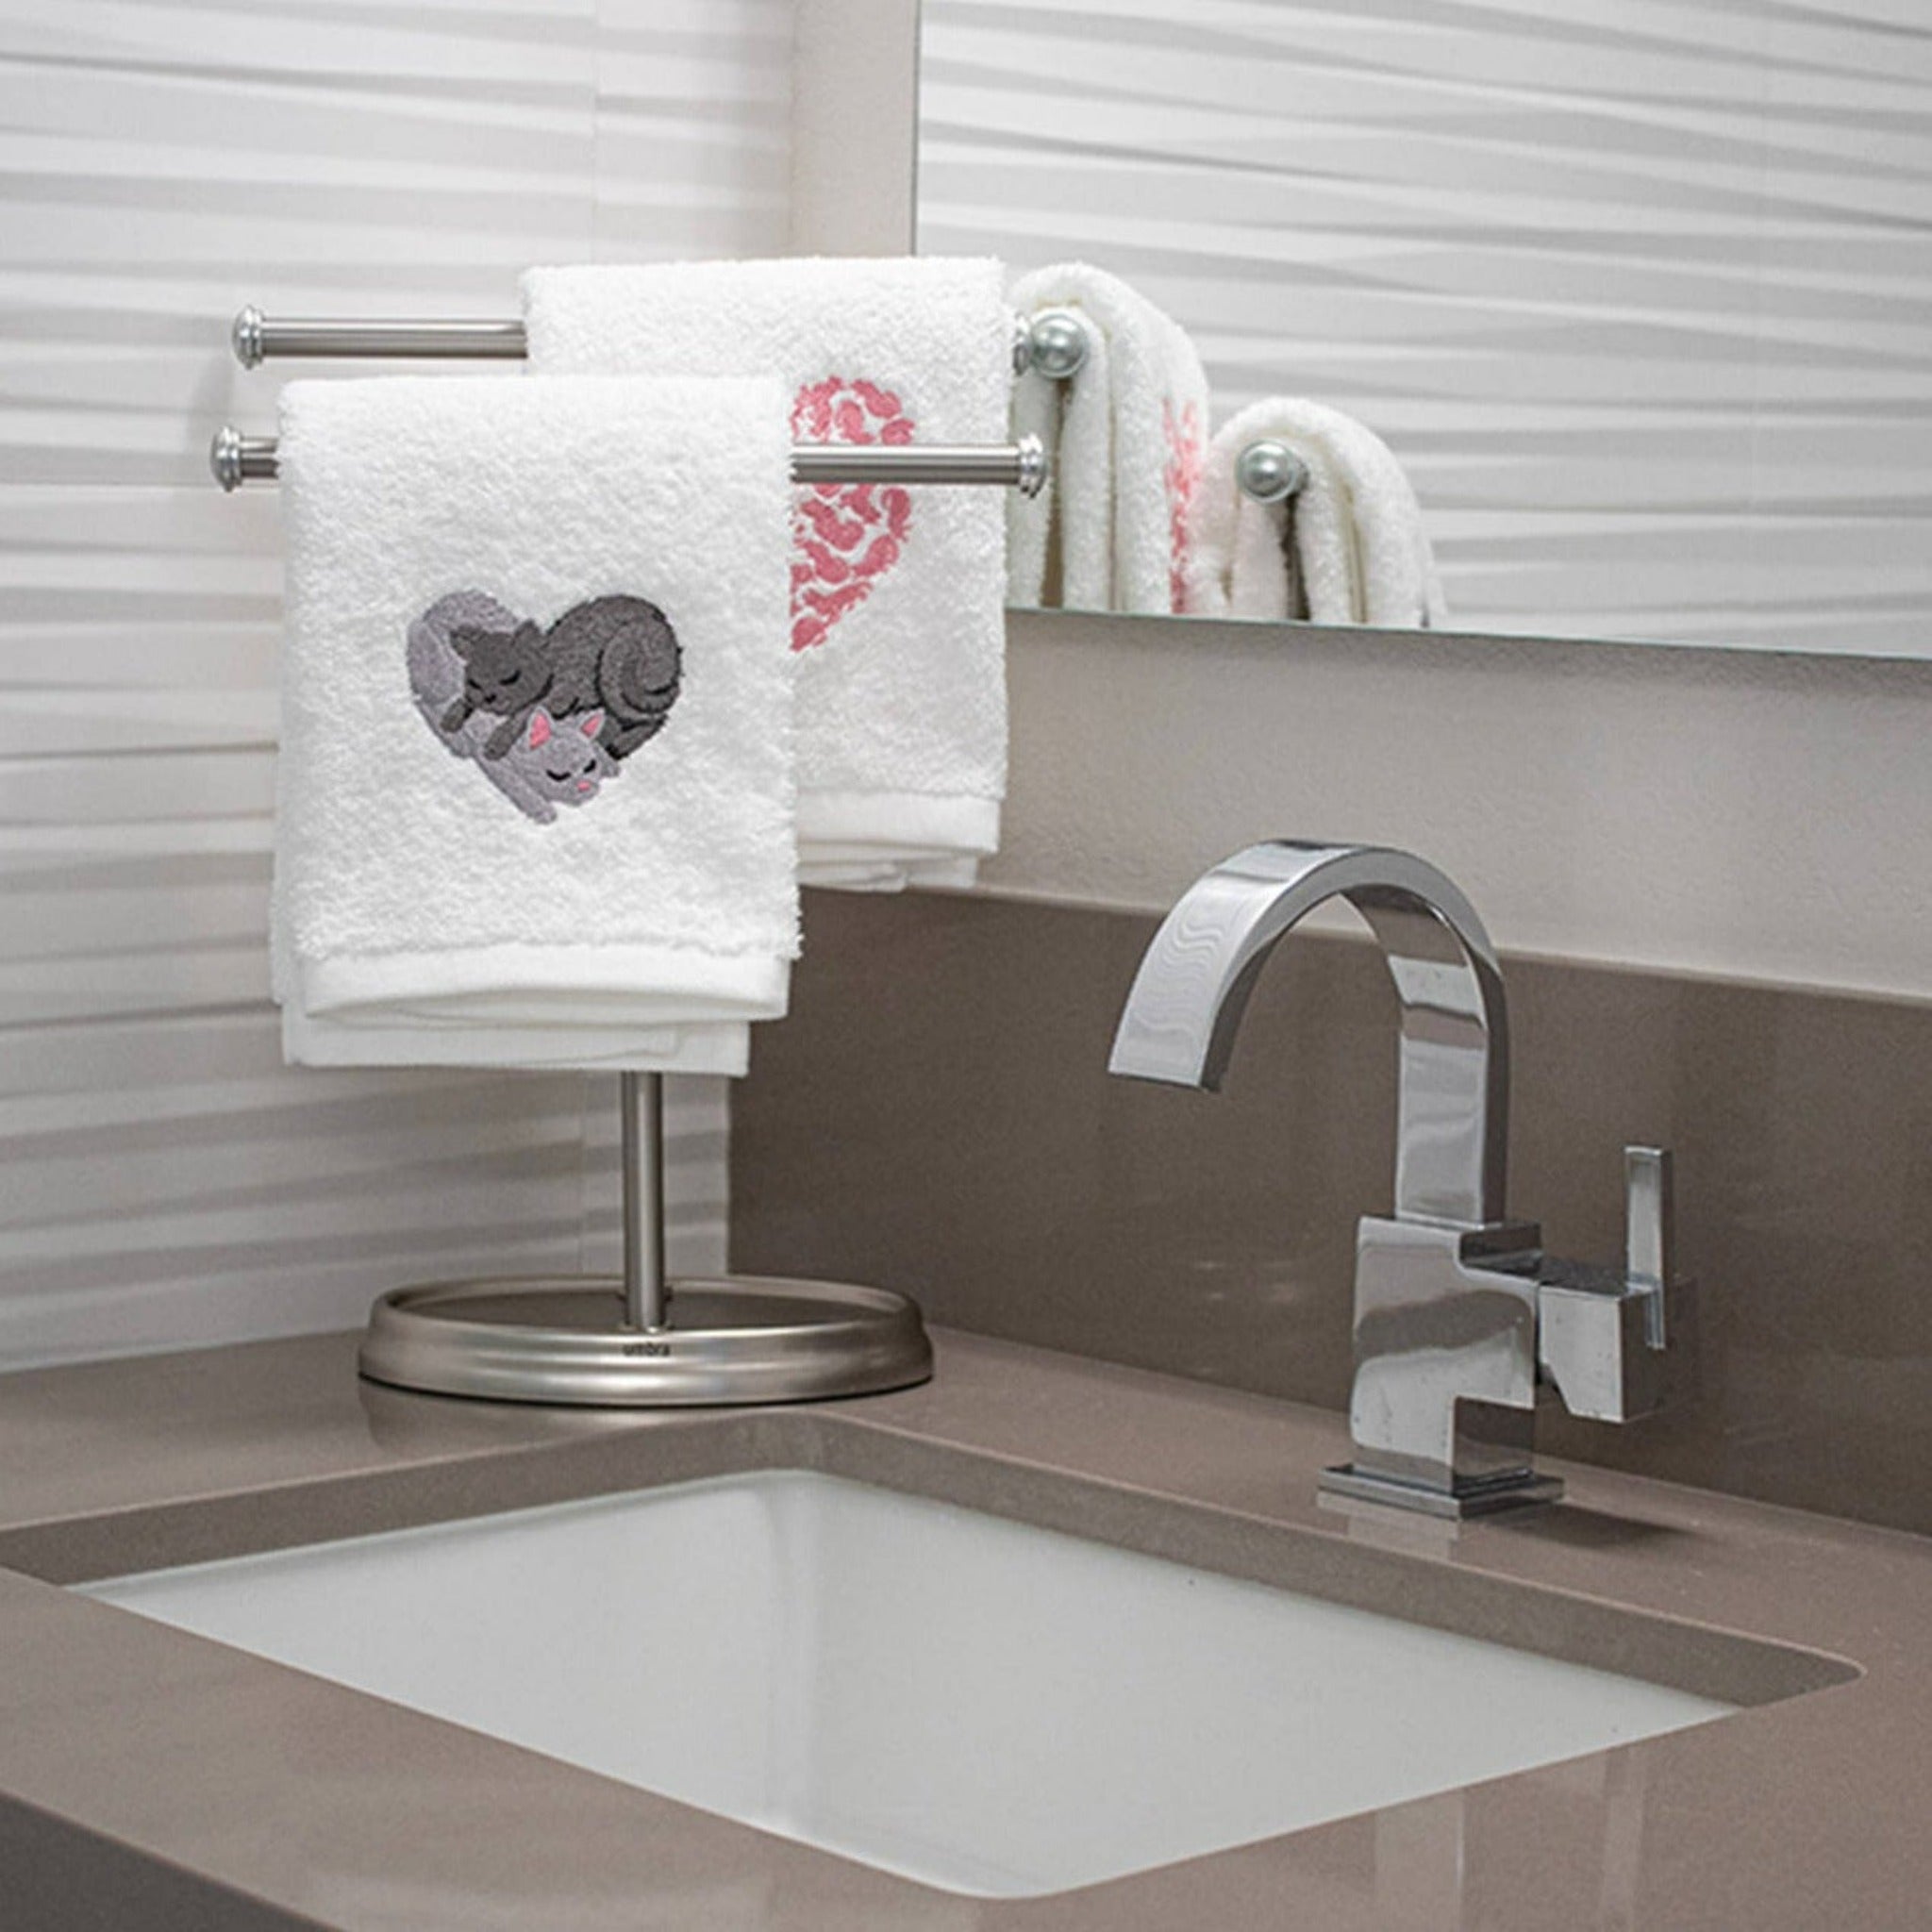 Embroidered cotton towel Cats